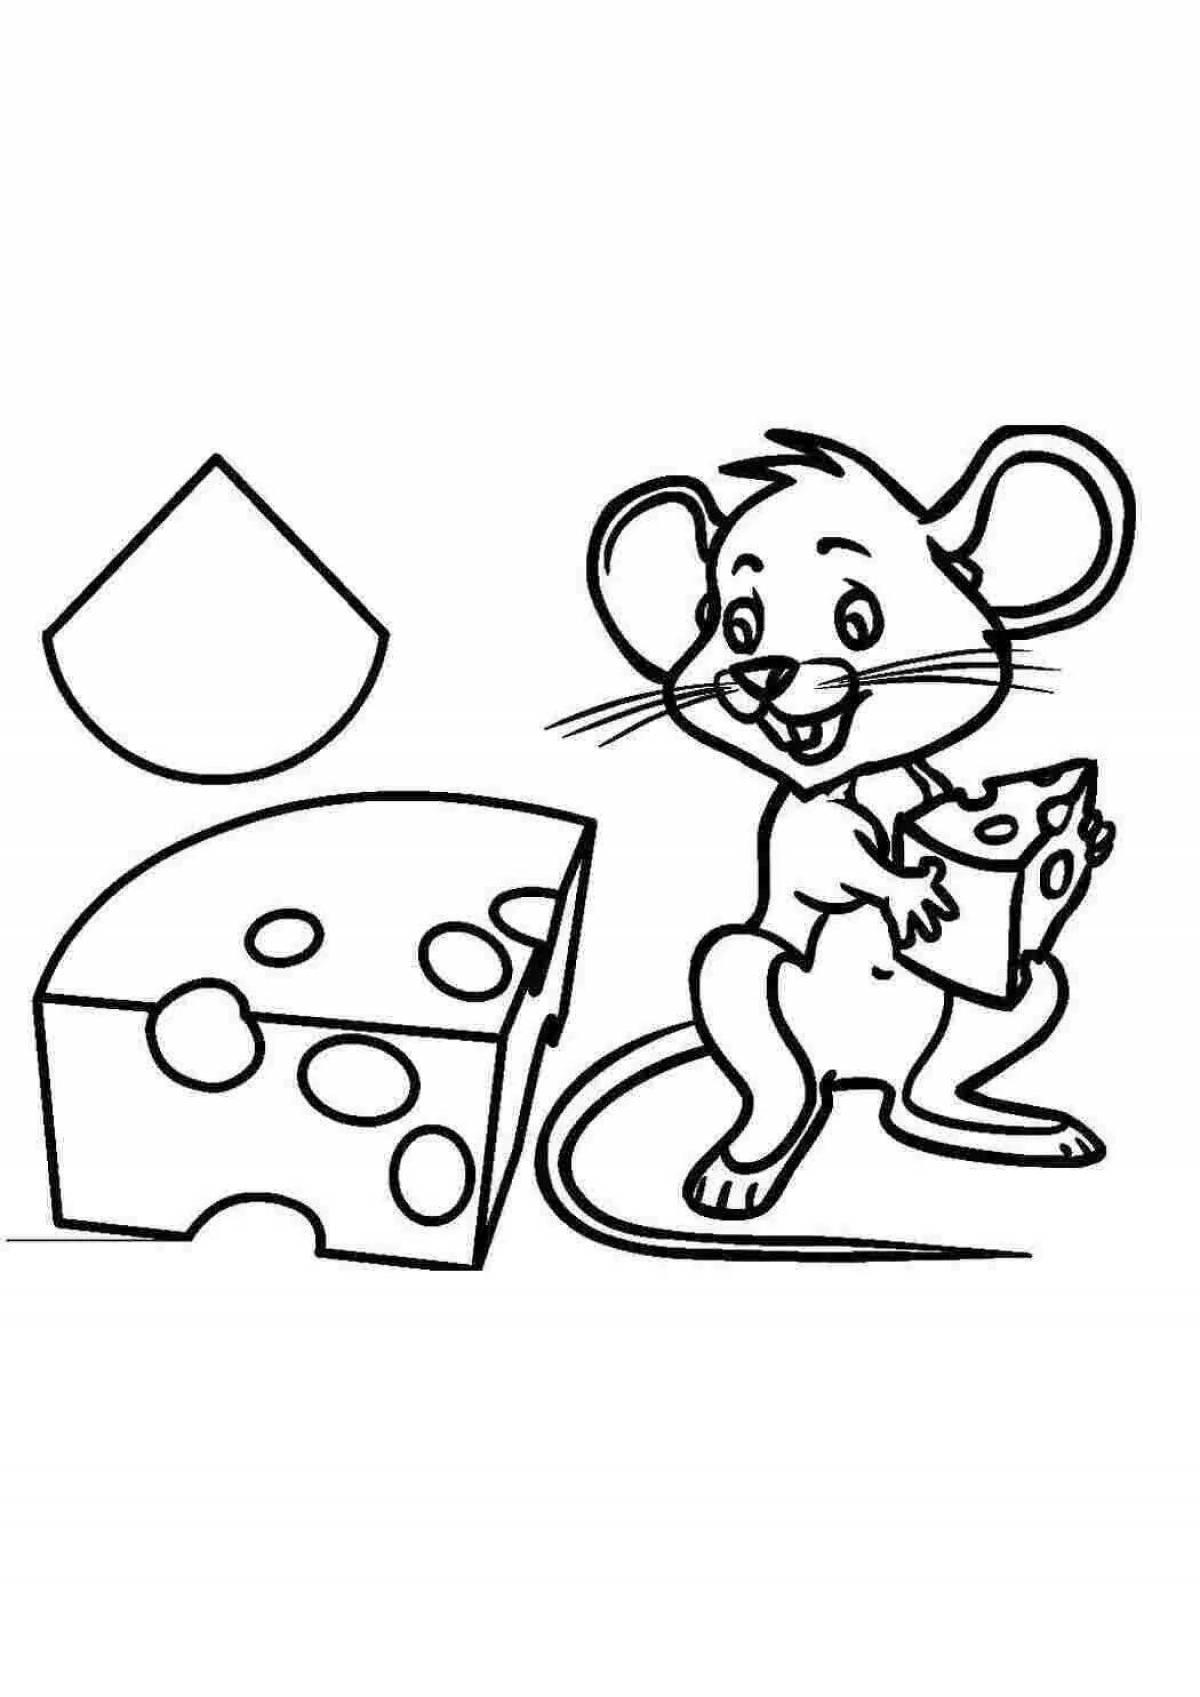 Fun mouse and bear coloring book